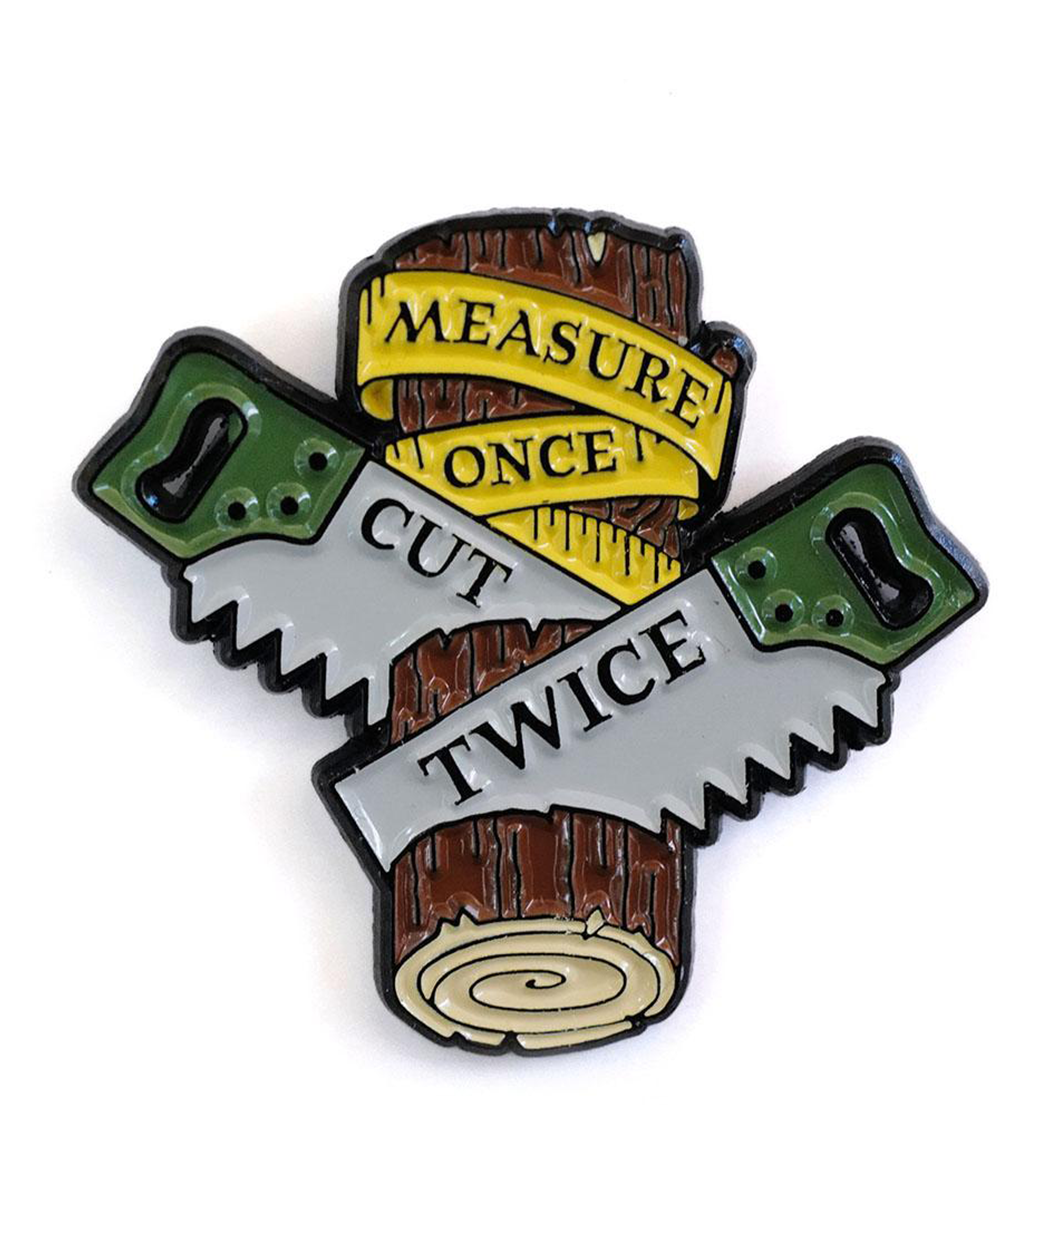 Black plated enamel pin of a log with two saws cutting it. A yellow measuring tape is wrapped across the top that says MEASURE ONCE and one saw says CUT and the other saw says TWICE.